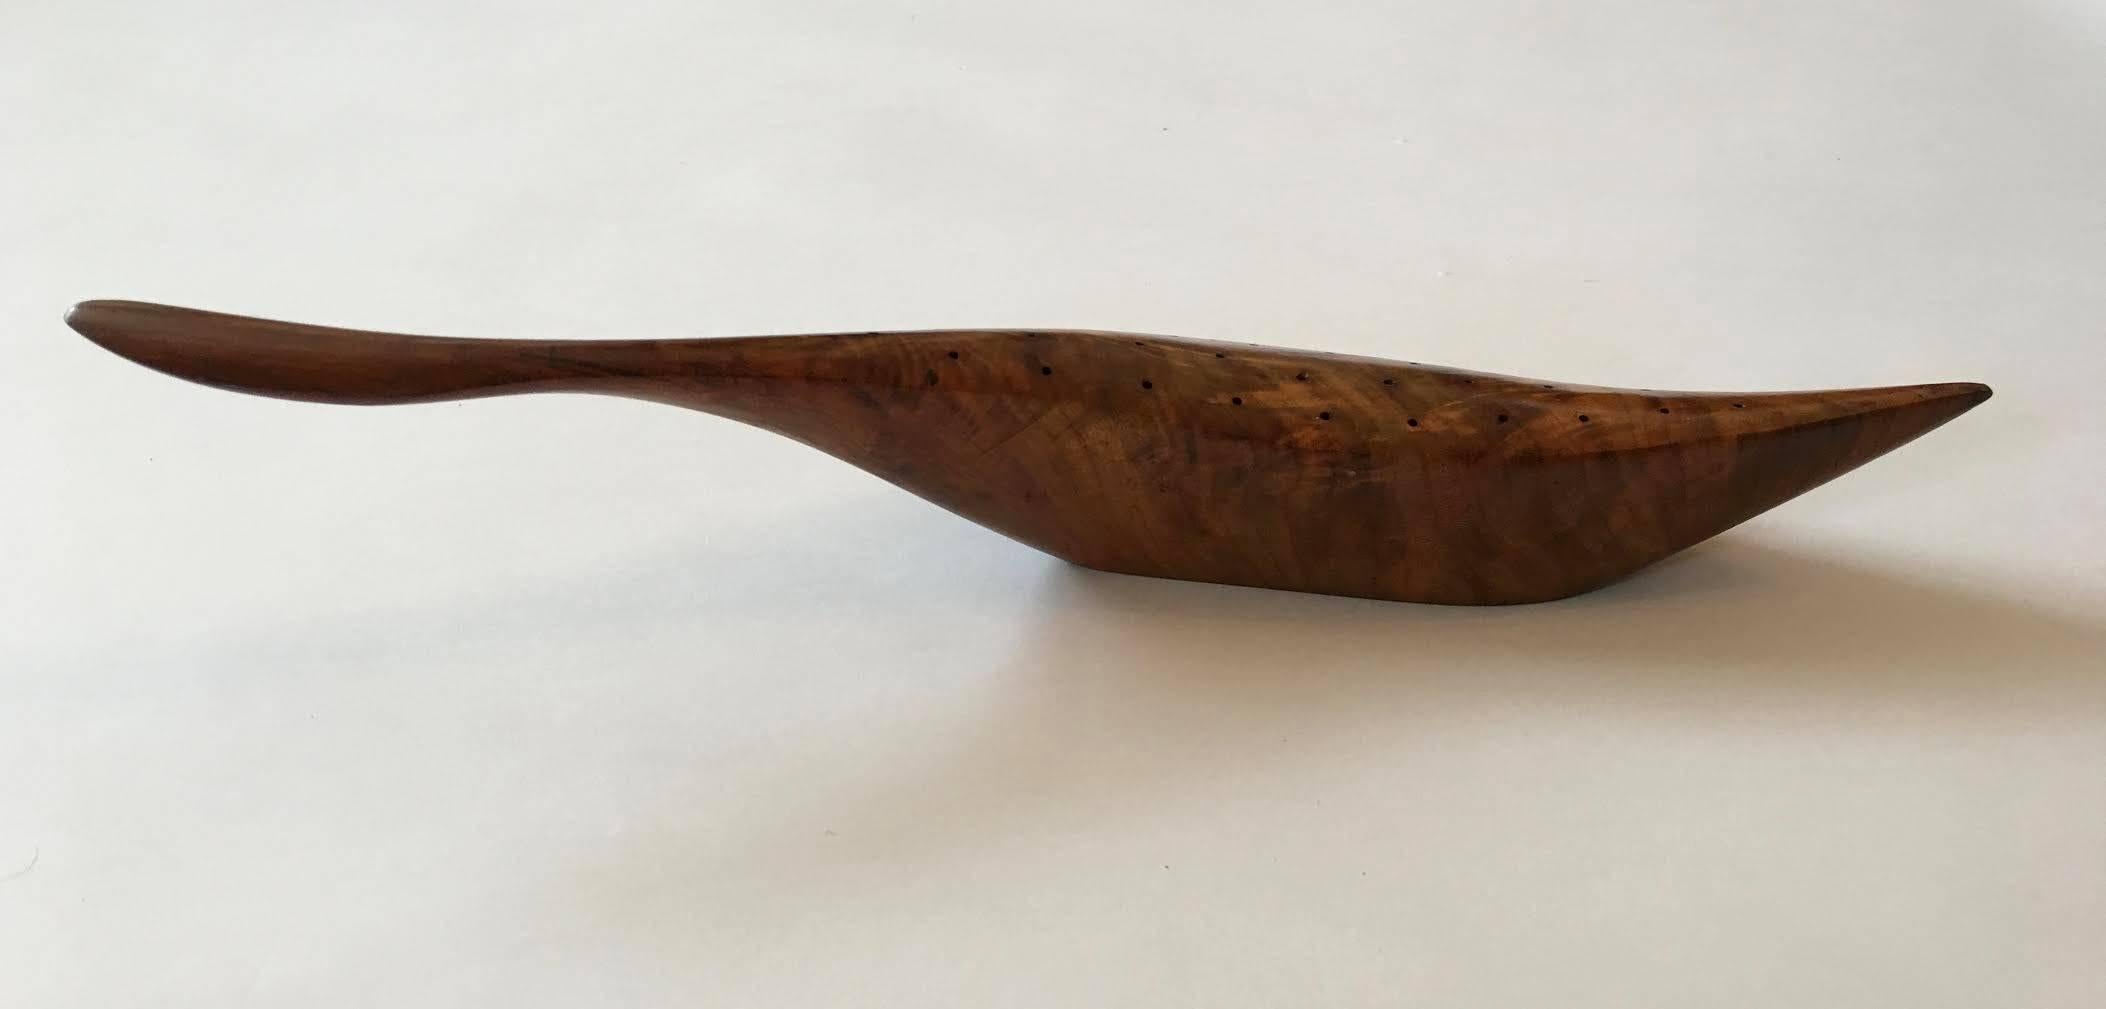 Hand-carved American walnut stylized bird by Emil Milan (1922-1985), circa 1950s and made in his studio in New Jersey.
This piece features superb shape, grain and color with 47 holes for serving hors d’oeuvre.

Base incised with Emilan mark and